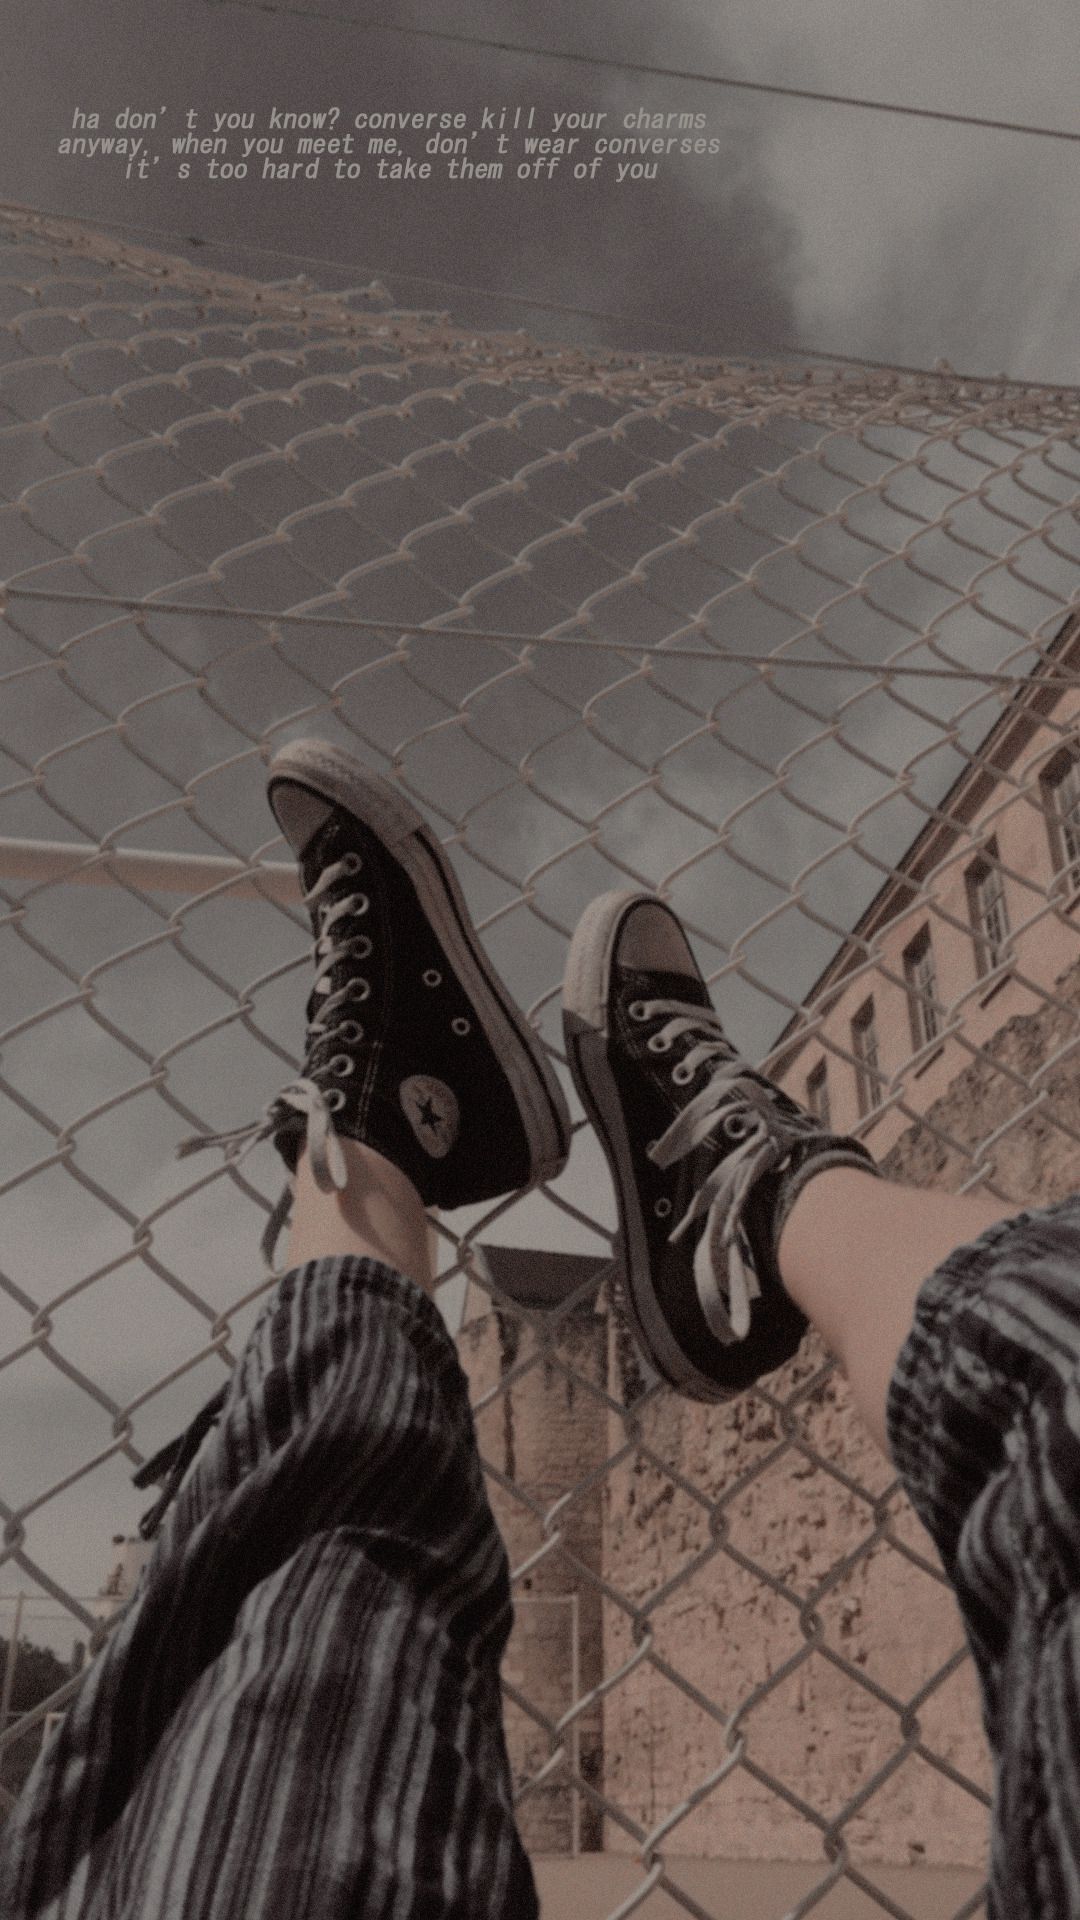 Aesthetic Converse wallpaper for iPhone and Android phone. - Converse, skate, skater